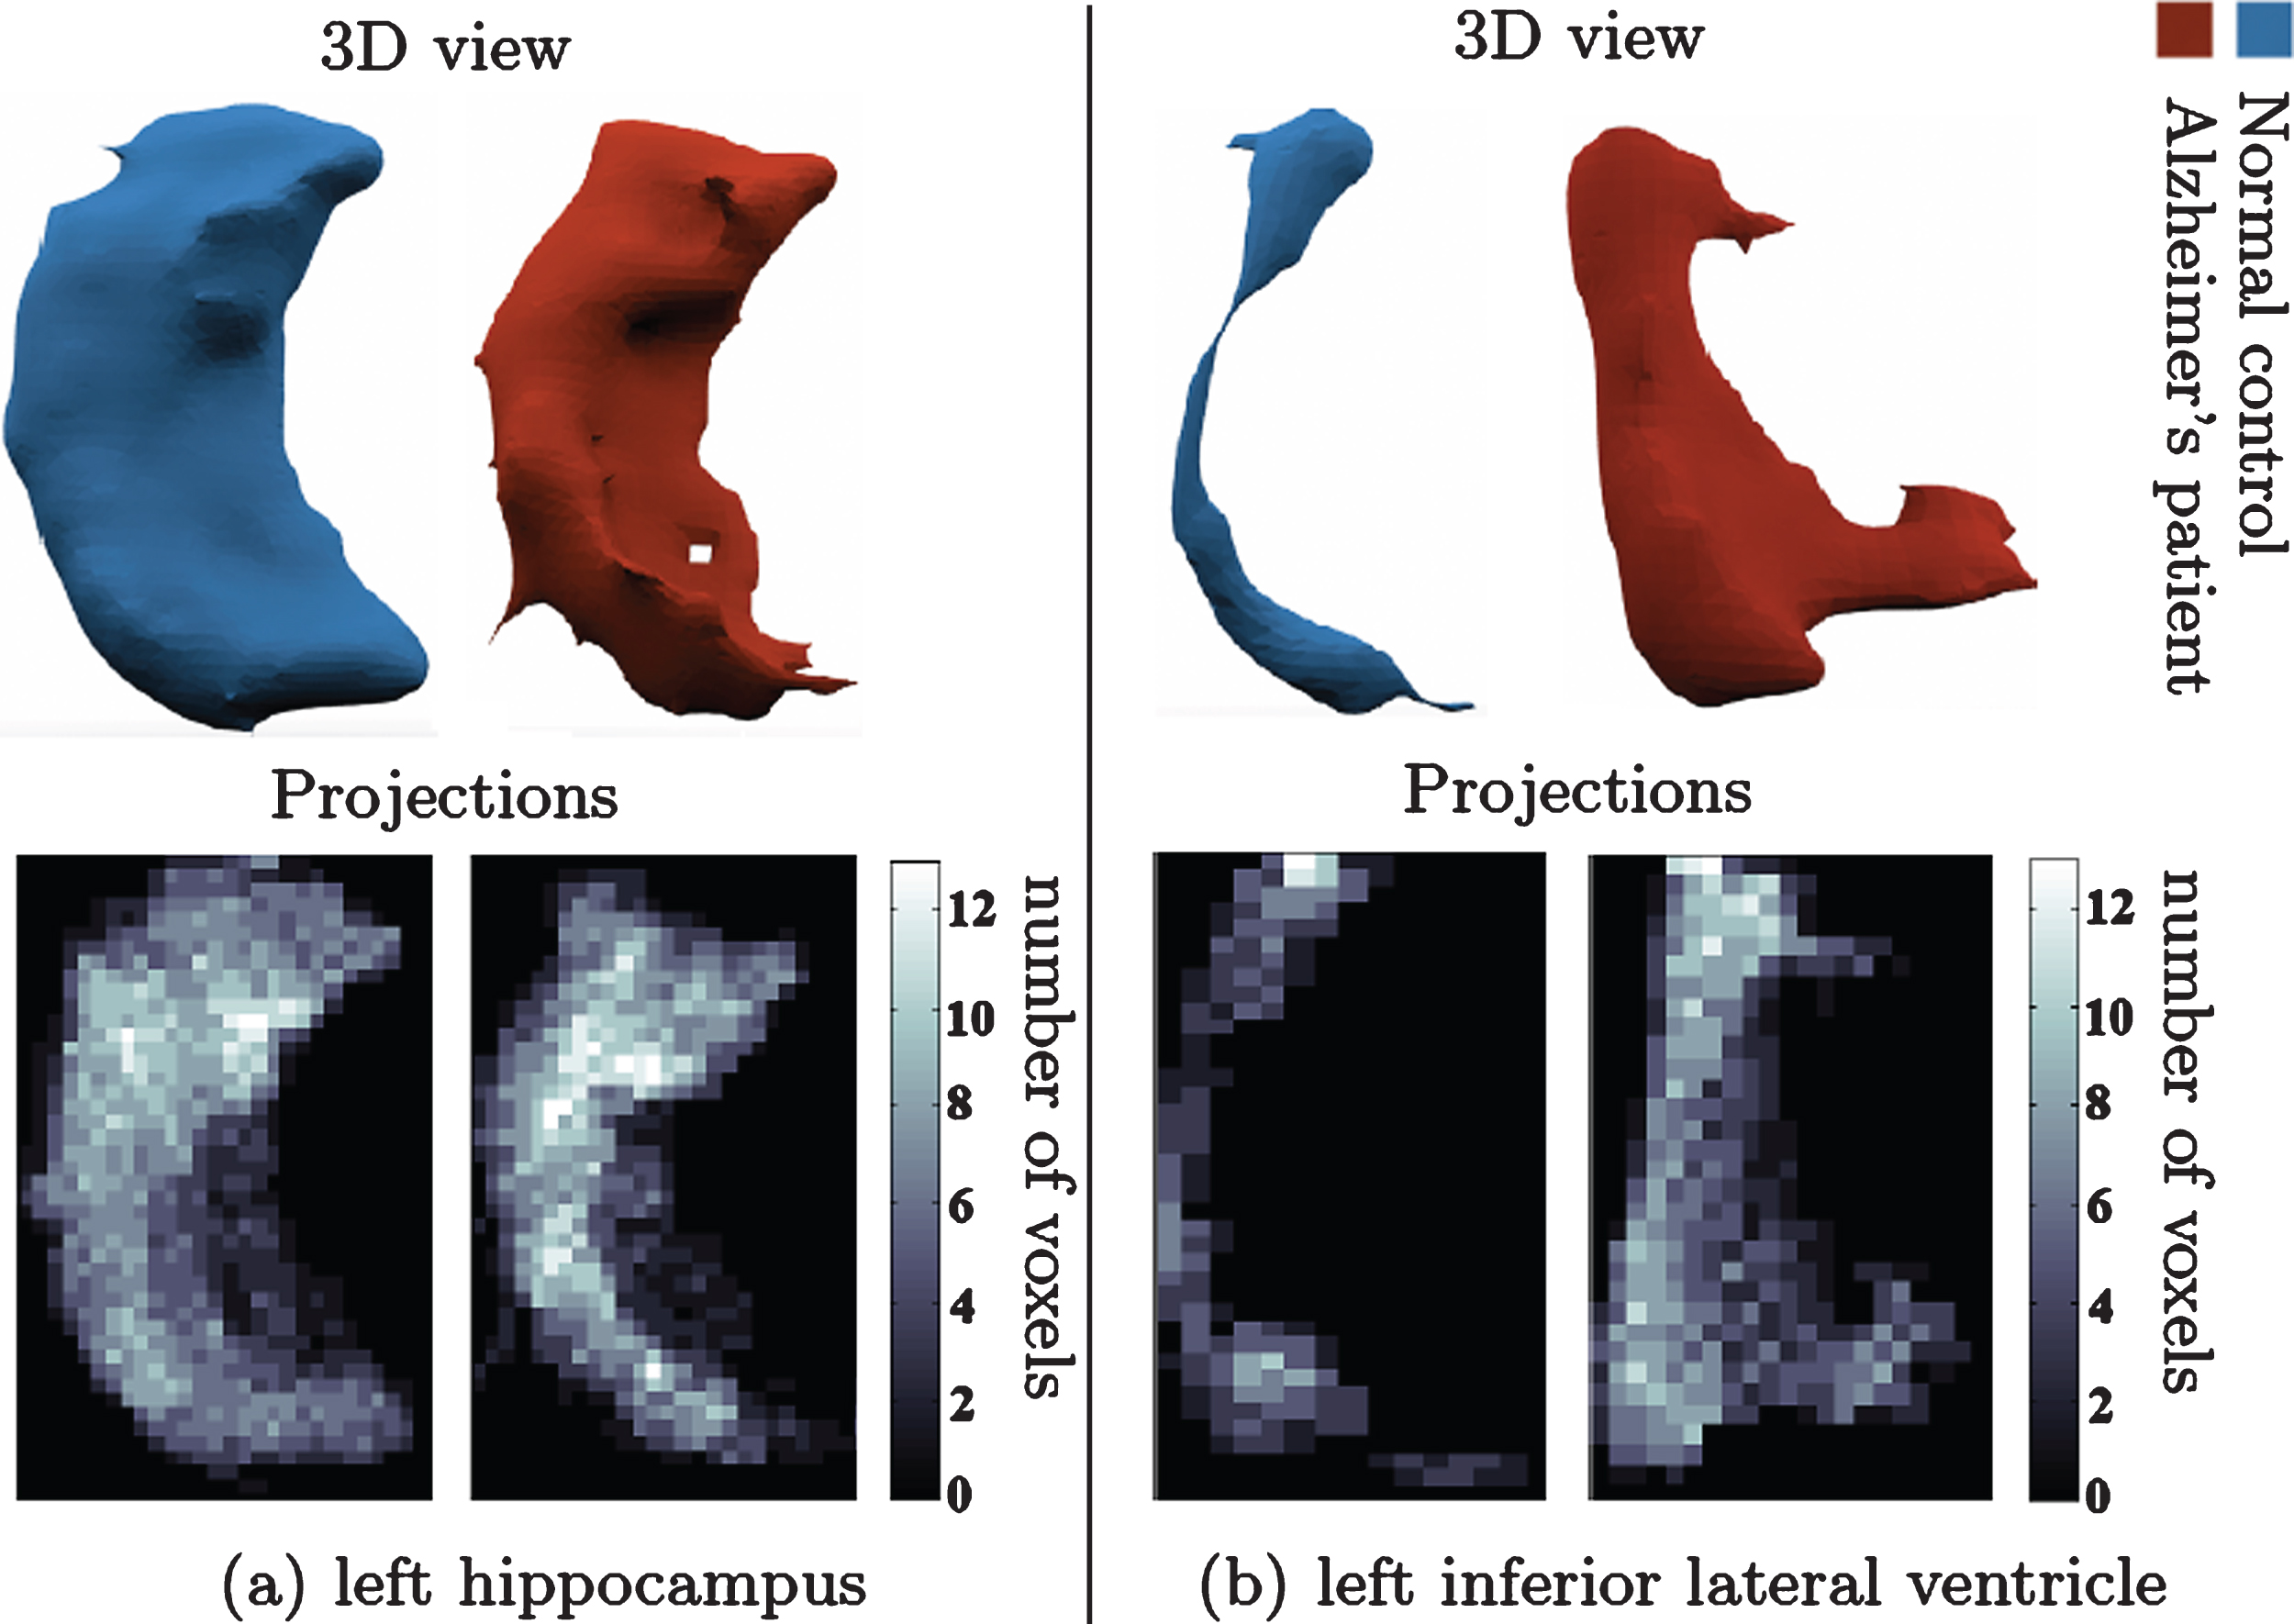 Change in shape of brain structures 
in AD manifested on projection images. (a) l. hippocampus 3D shape (upper panel) in NC (left) and AD (right). 
(b) l. inf. lat. ventricle 3D shape (upper panel) in healthy control (left) and AD patient (right). Lower panel 
shows the corresponding canonical view using our 
principal projections method.